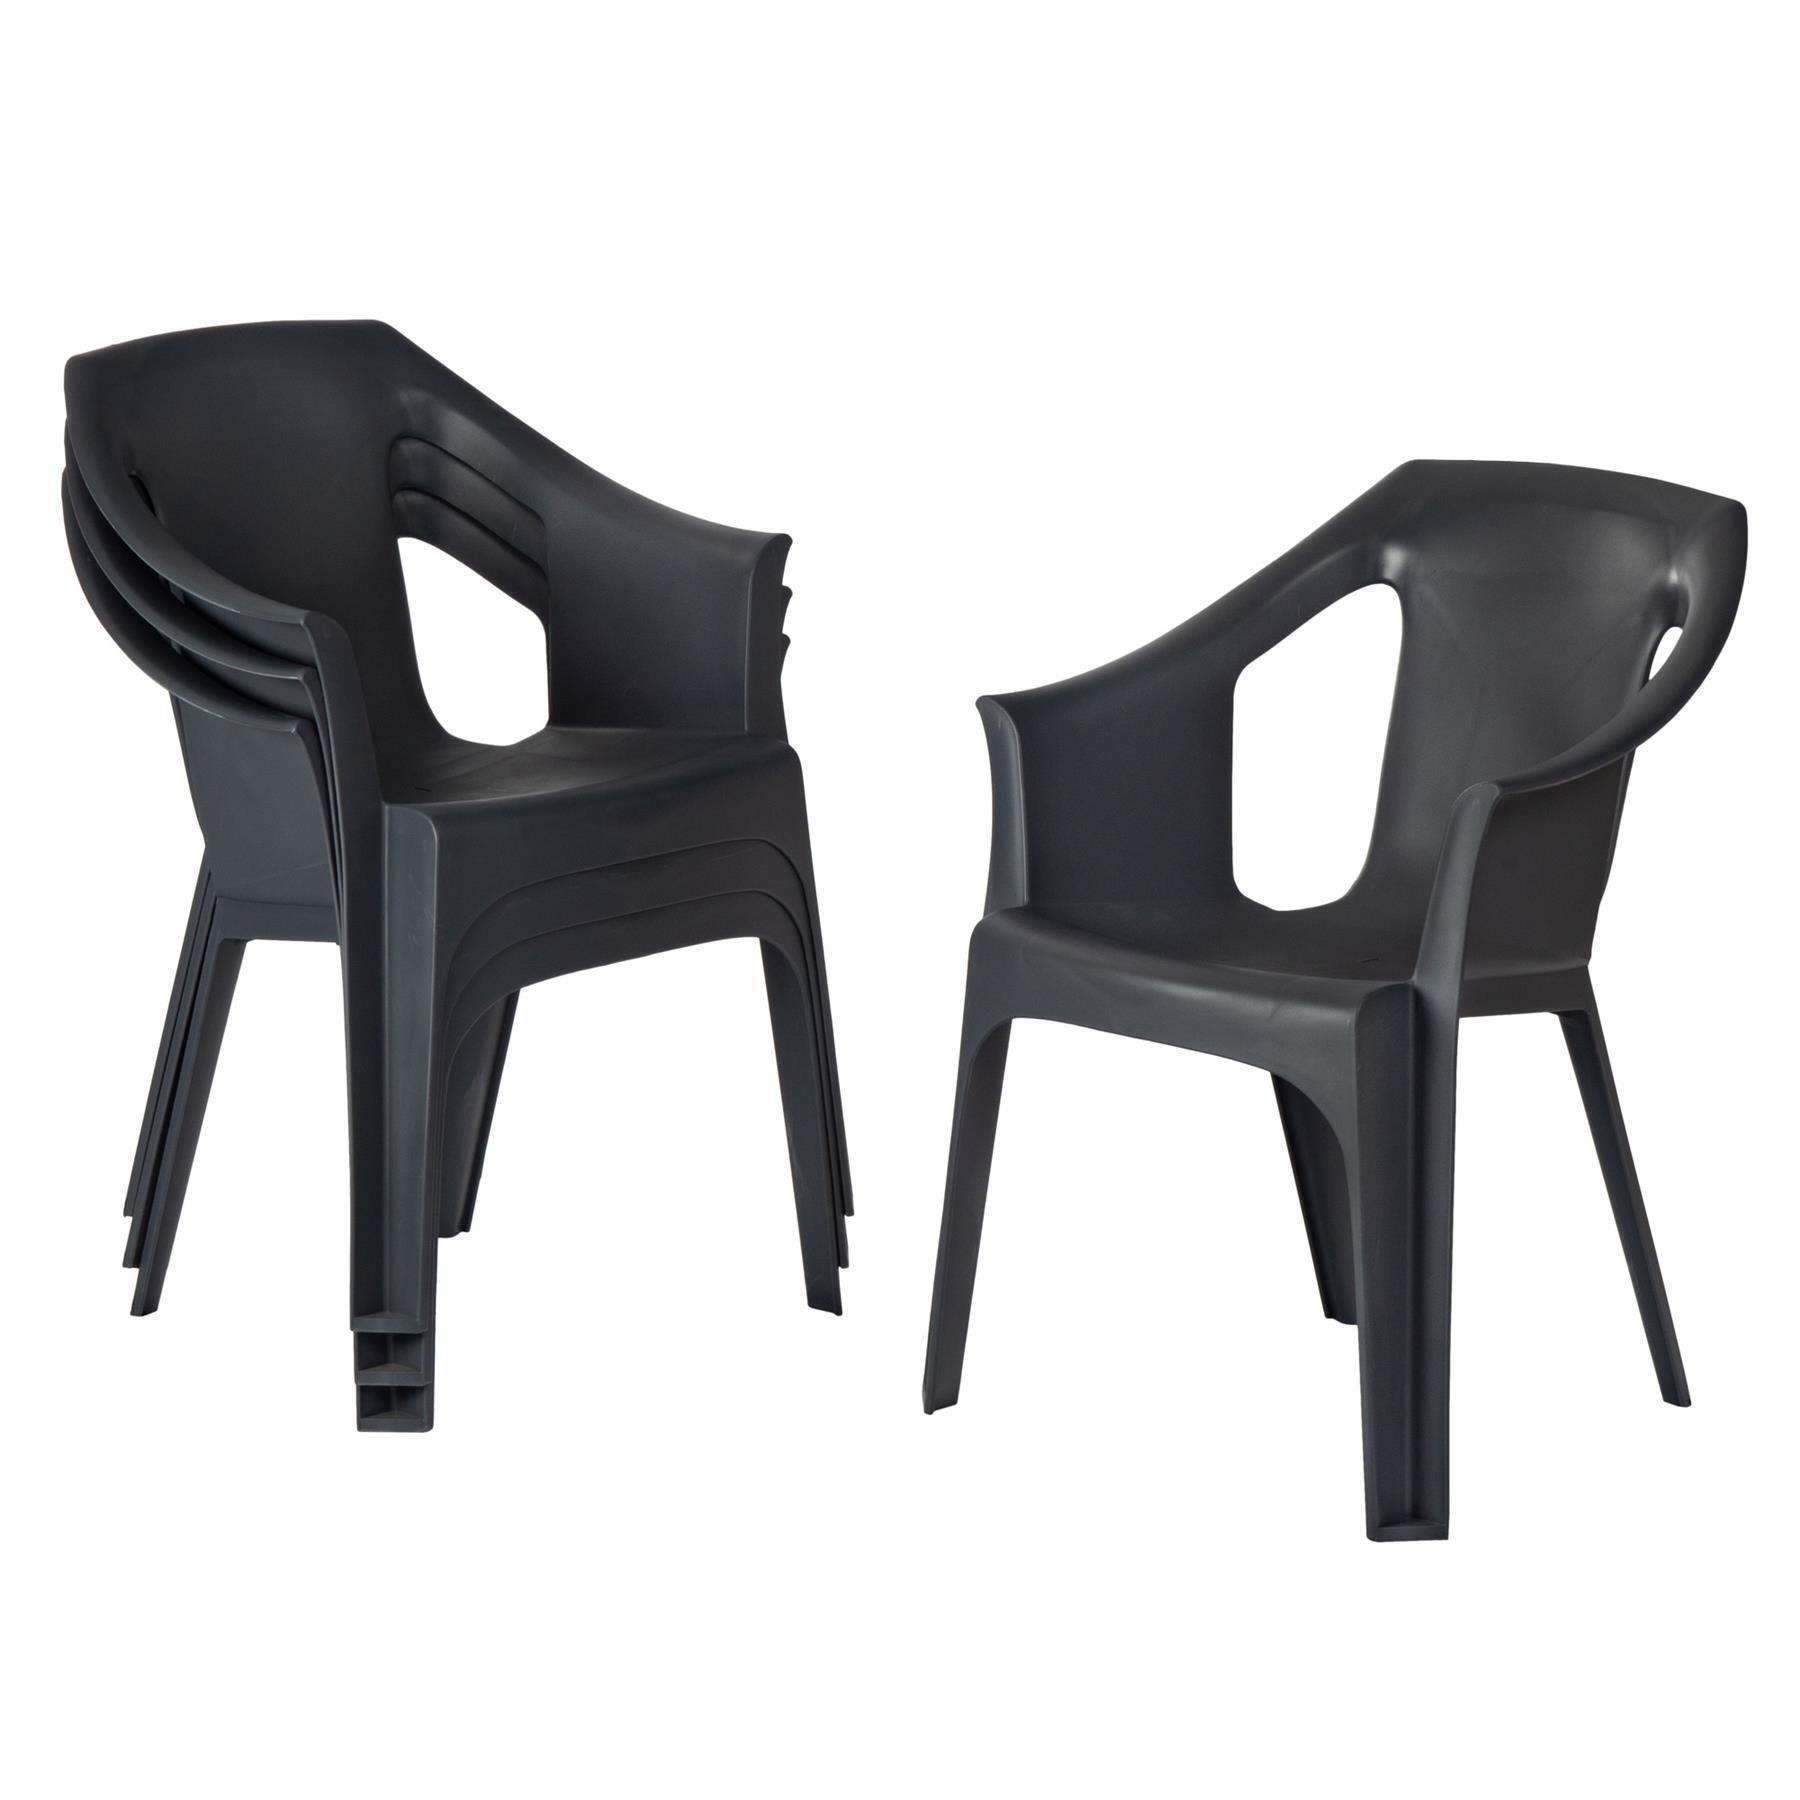 Cool Garden Dining Chairs Pack of 8 - image 1